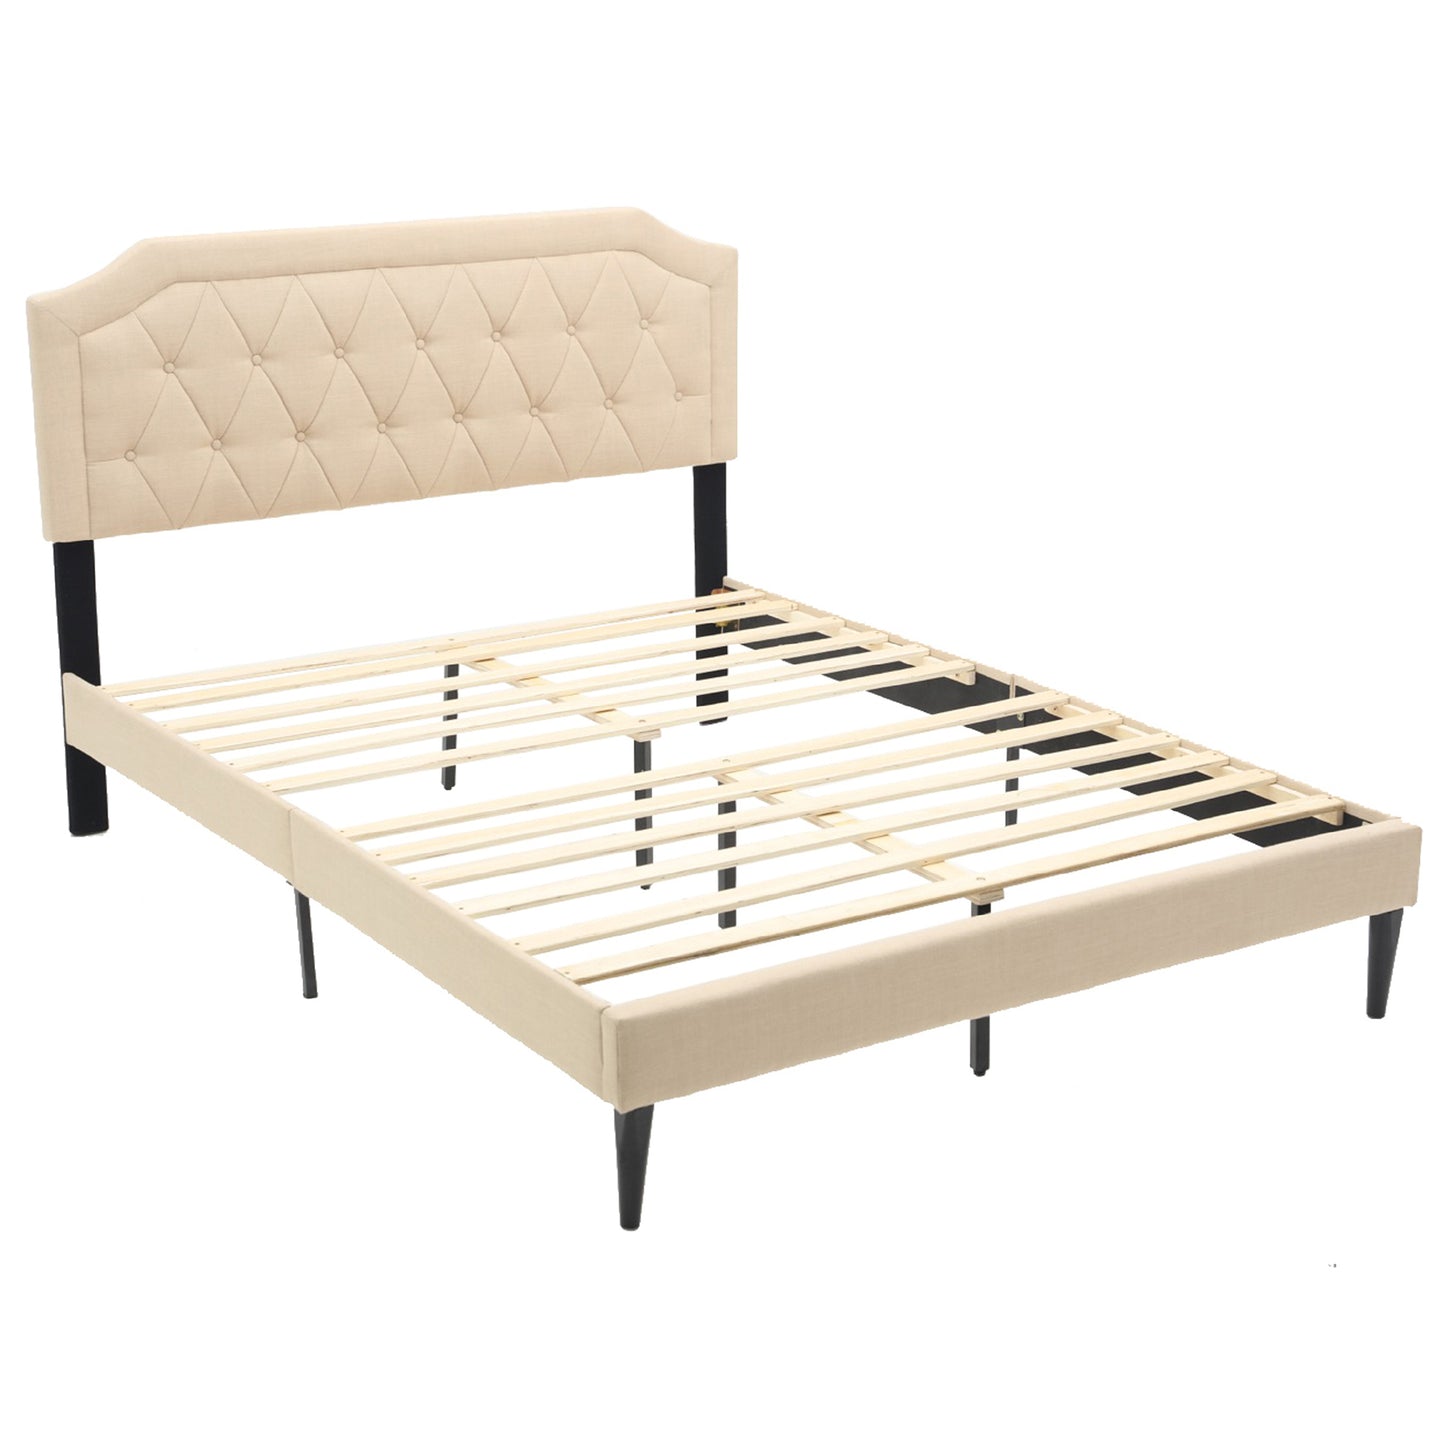 SYNGAR Queen Platform Bed Frame with Upholstered Linen Fabric Square Stitched Headboard, Metal Frame Mattress Foundation with Wooden Slat Support, Beige